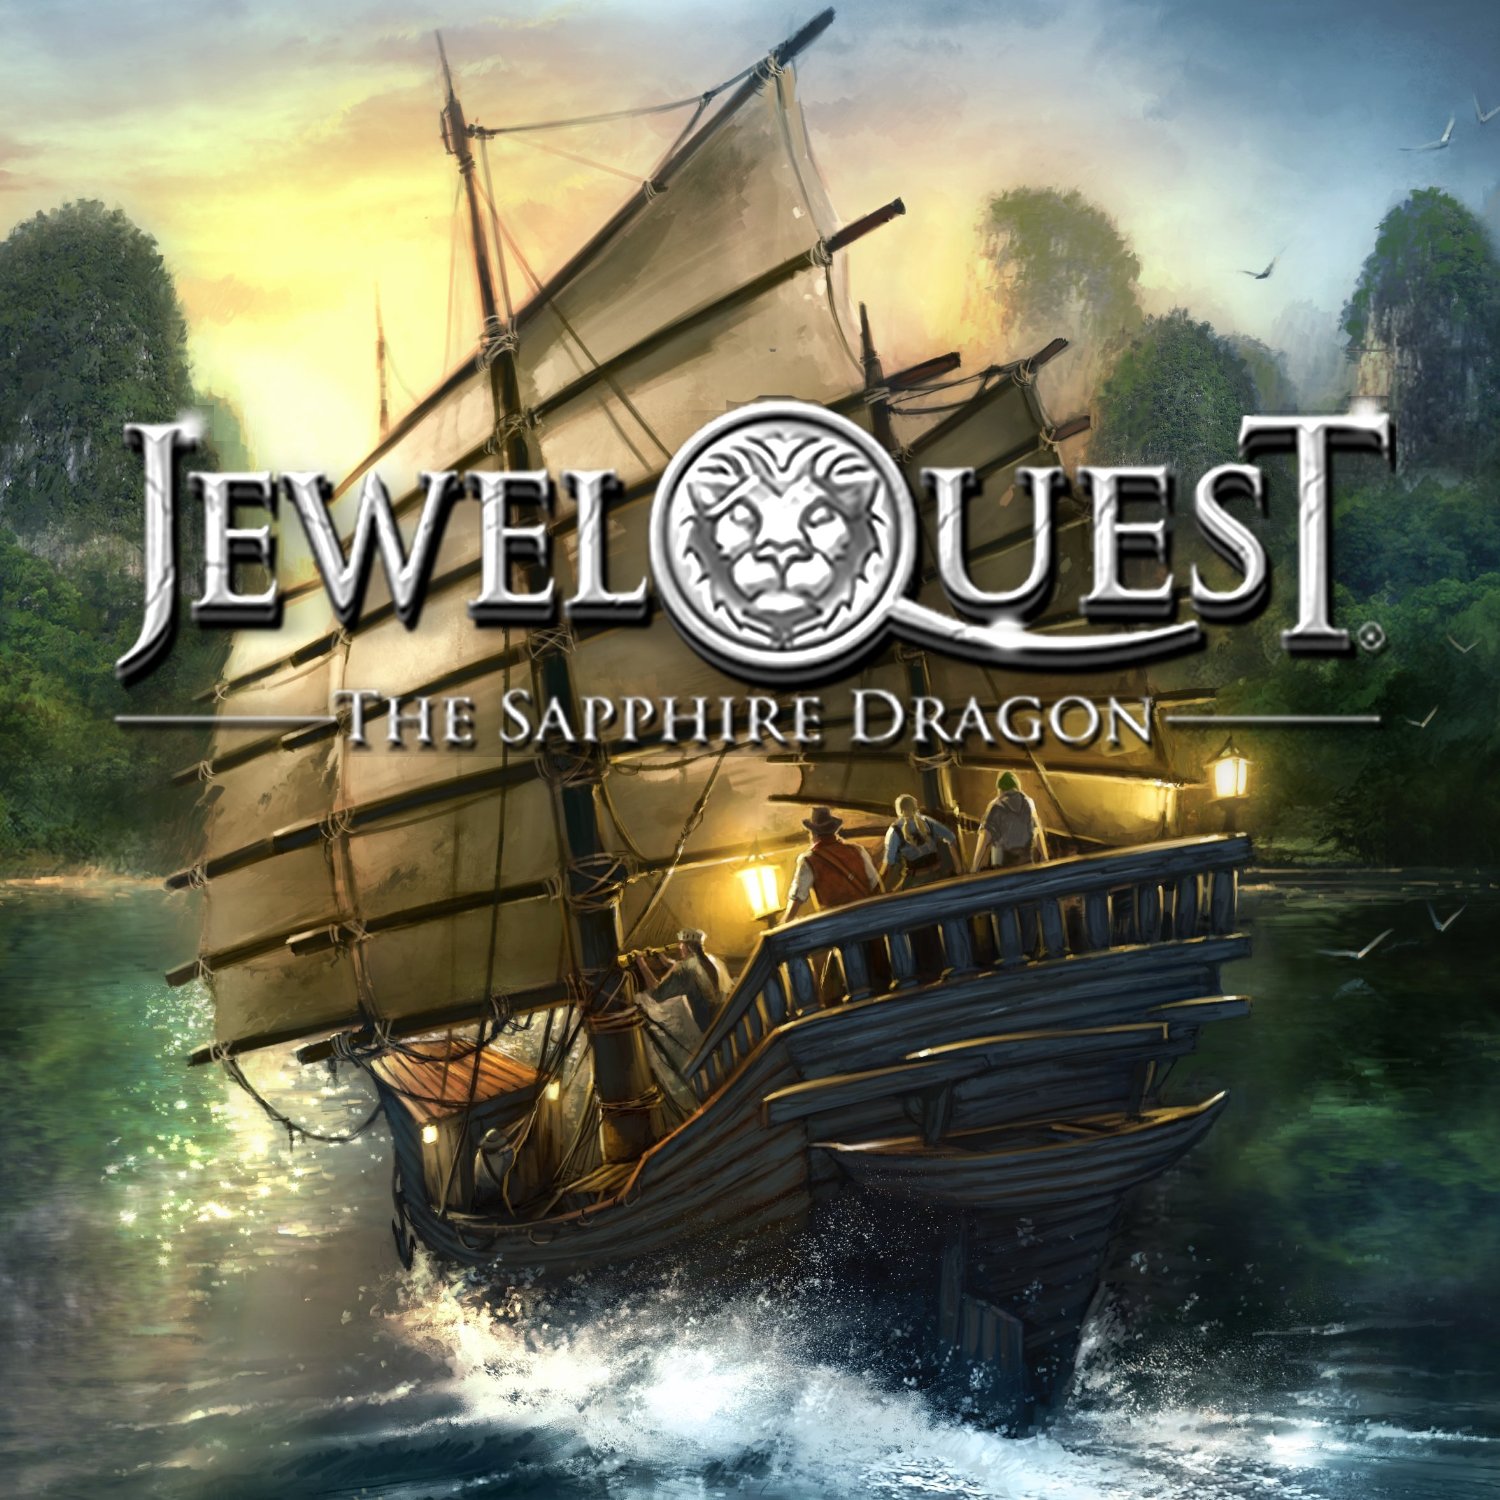 Amazing Jewel Quest: The Sapphire Dragon Pictures & Backgrounds